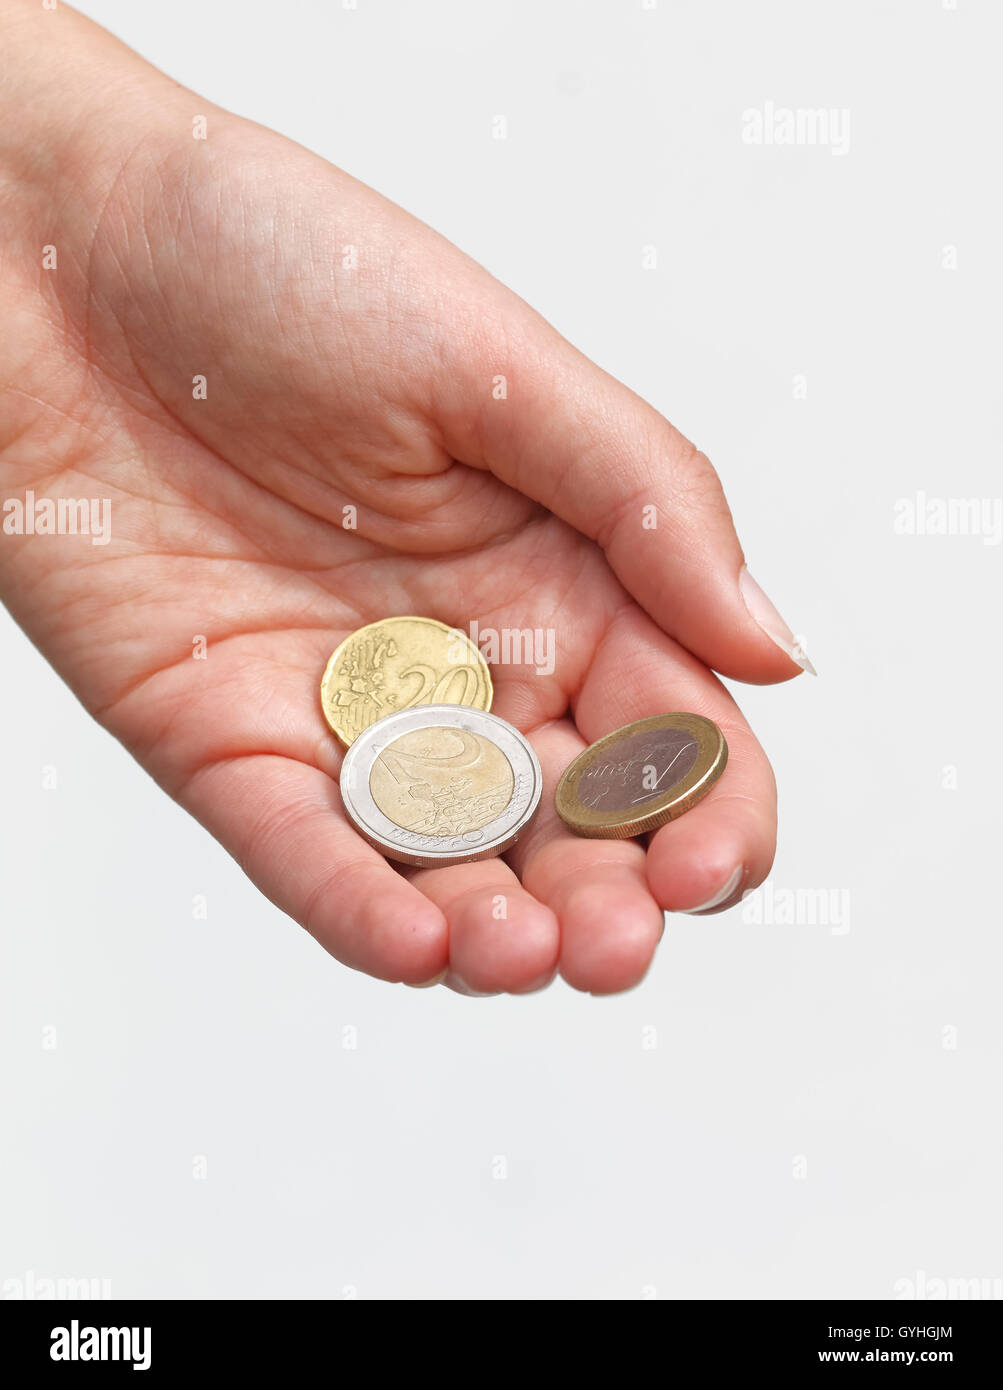 Paying - Hand giving some Euro coins Stock Photo